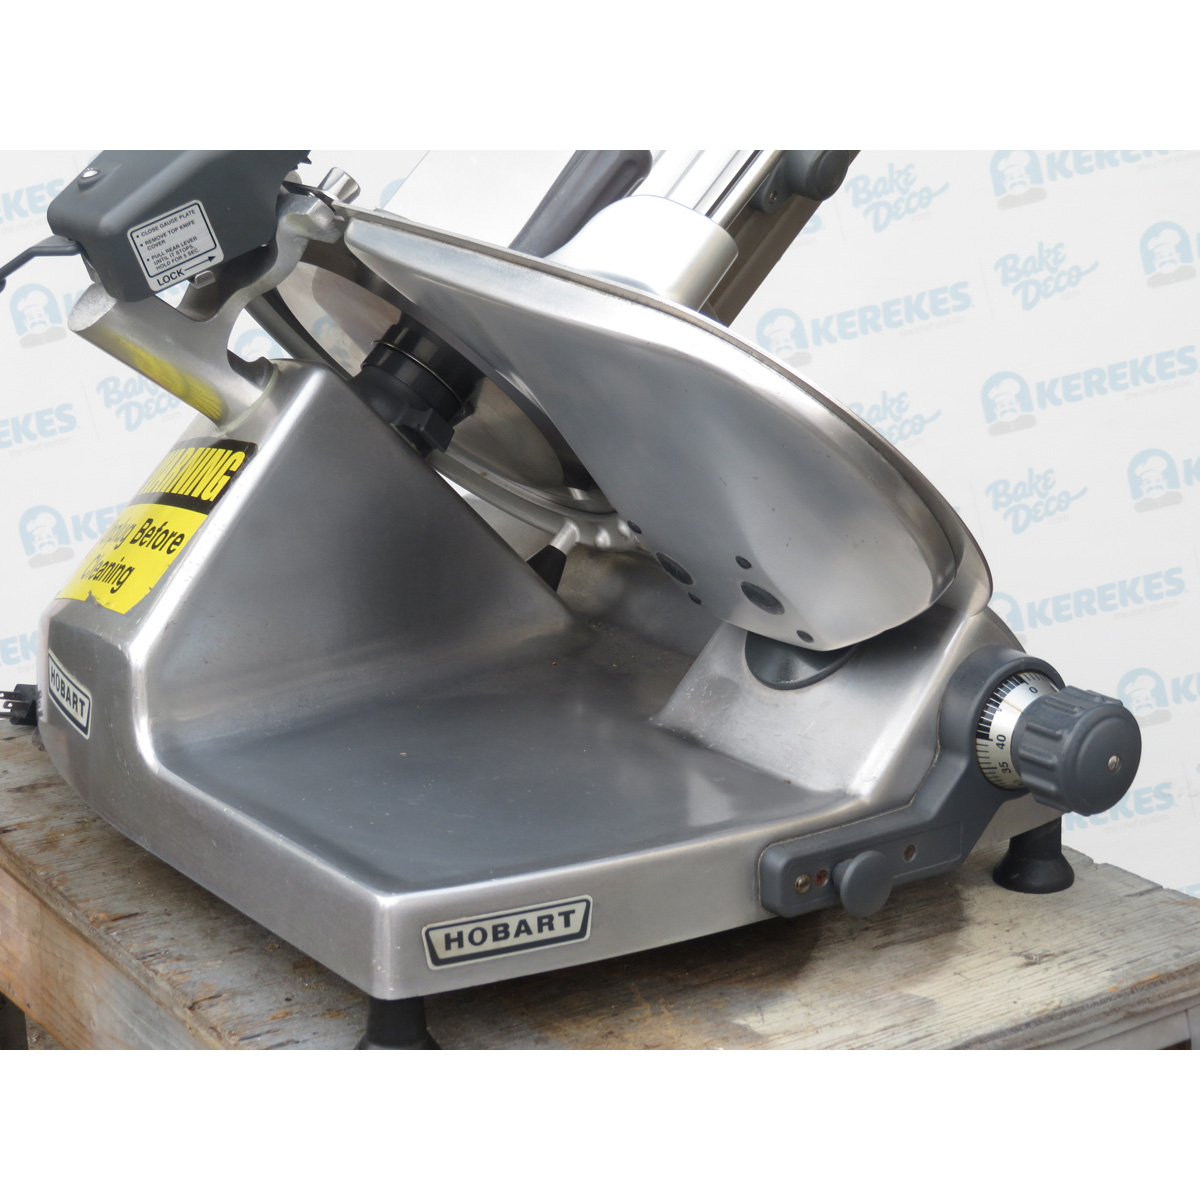 Hobart 2612 Meat Slicer, Used Excellent Condition image 1